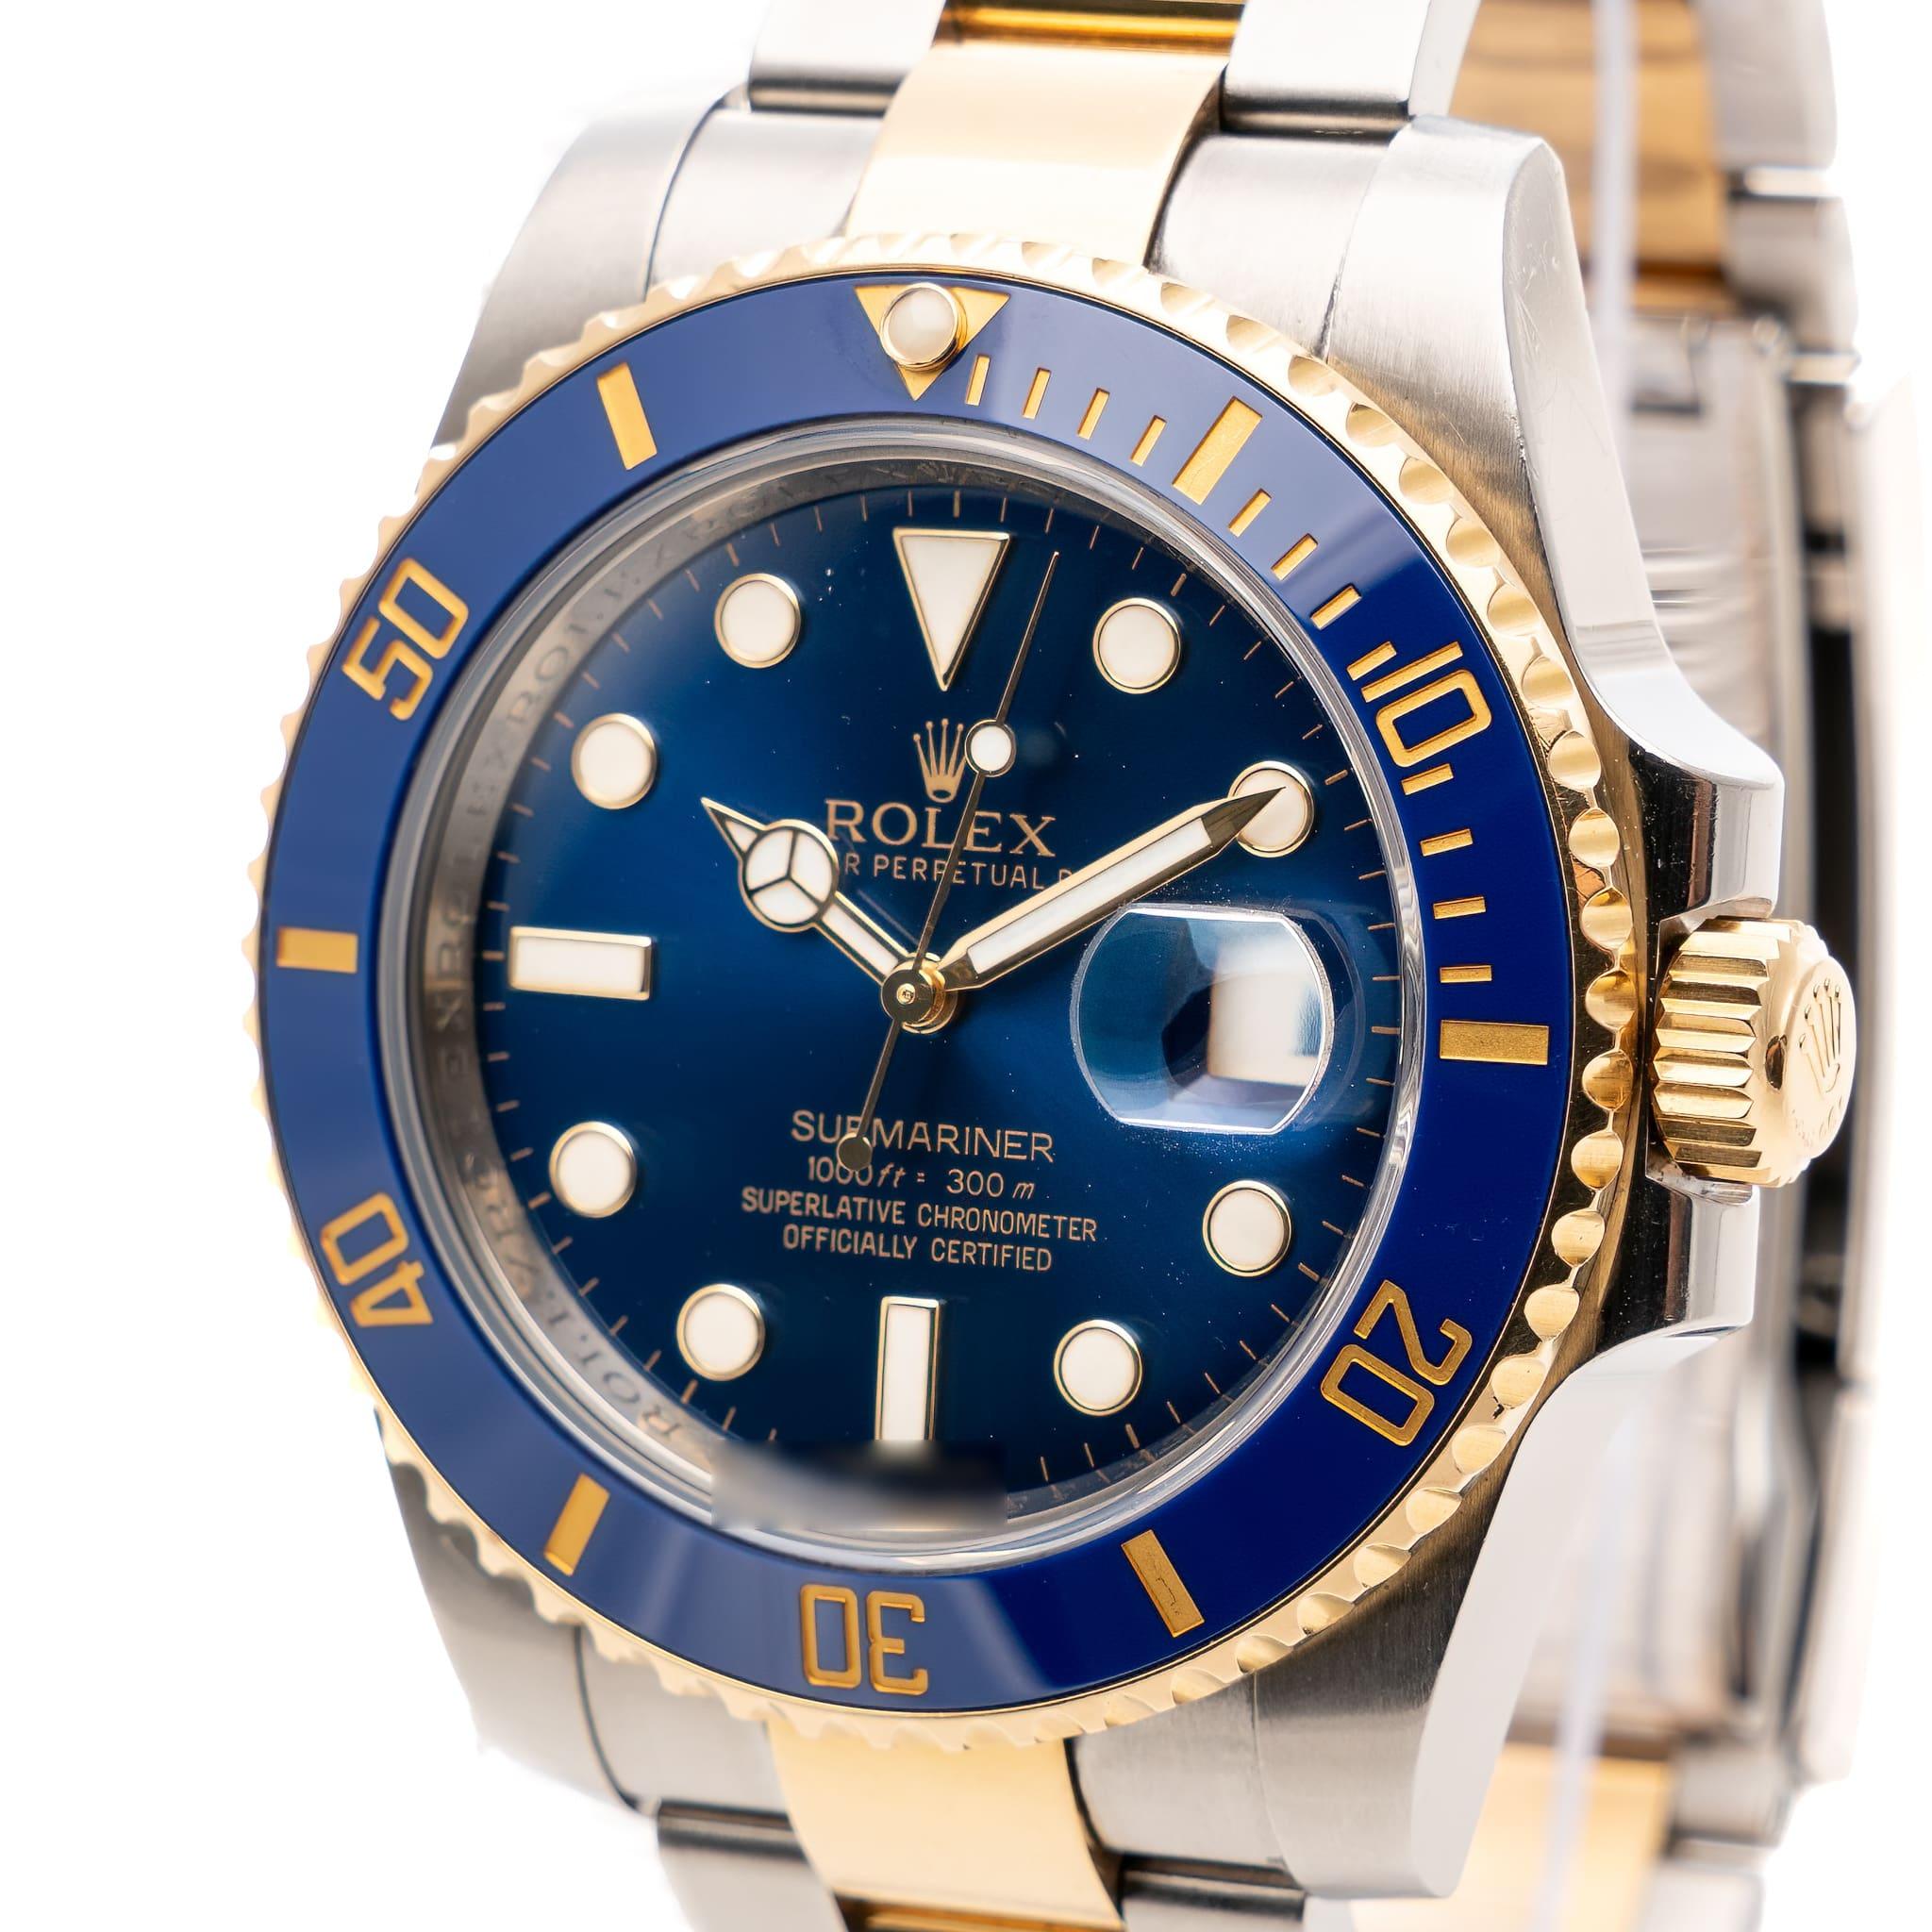 Women's or Men's Rolex Submariner Date 40mm Two Tone Blue Ceramic Dial Oyster Ref: 116613LB